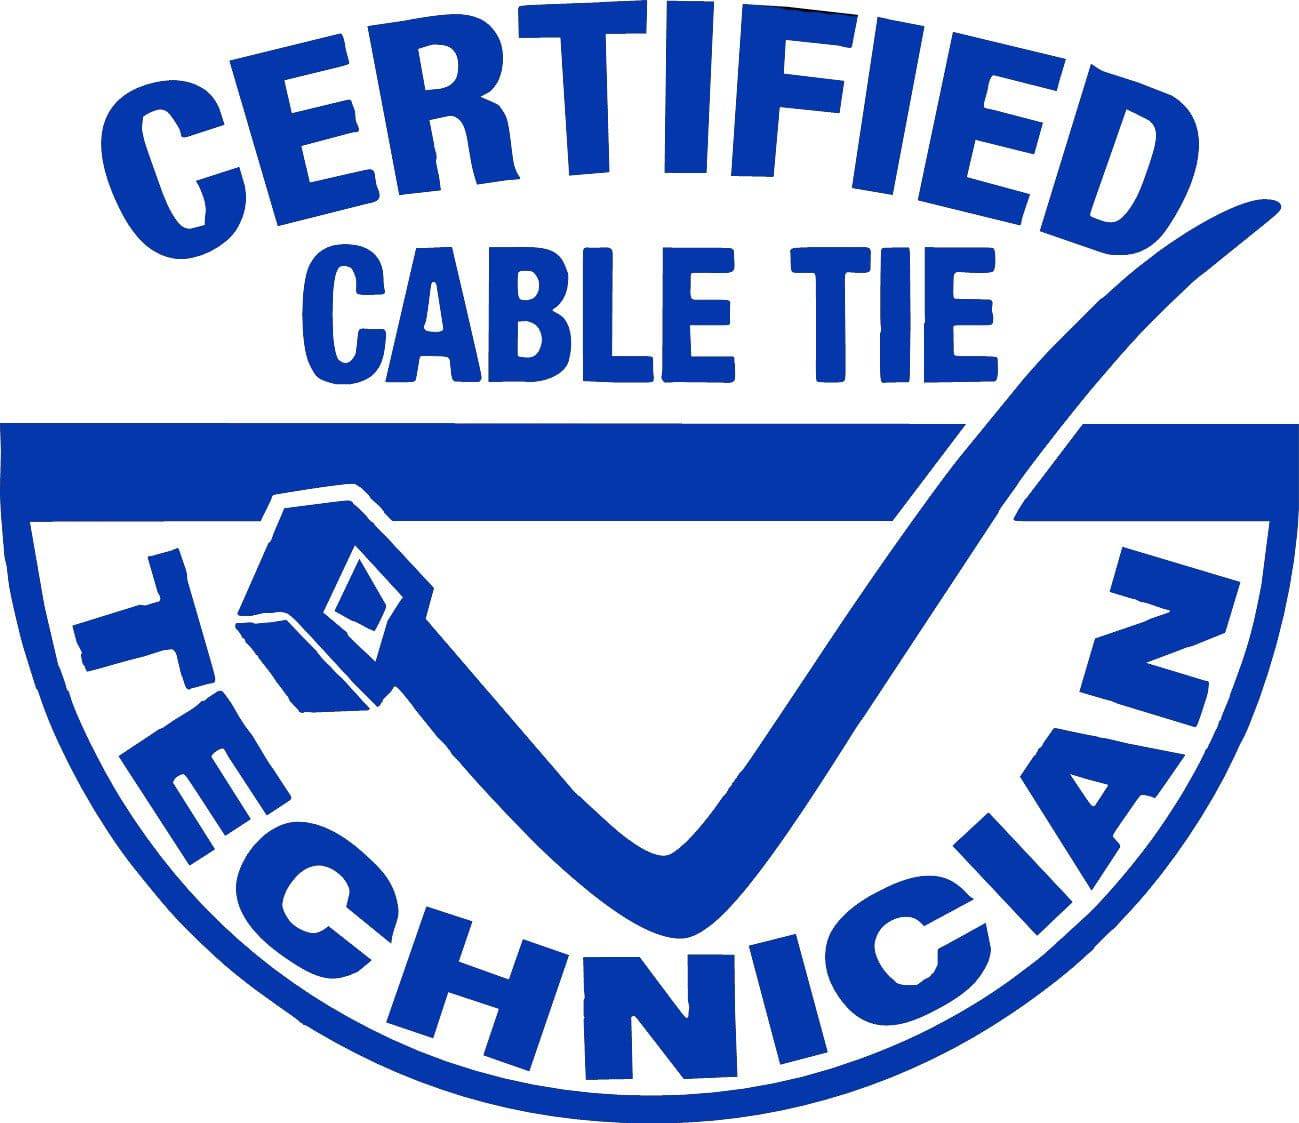 Certified Cable Tie Technicion Sticker - Funny Window / Windscreen Decal | QIKAZZ 4x4 & Camping